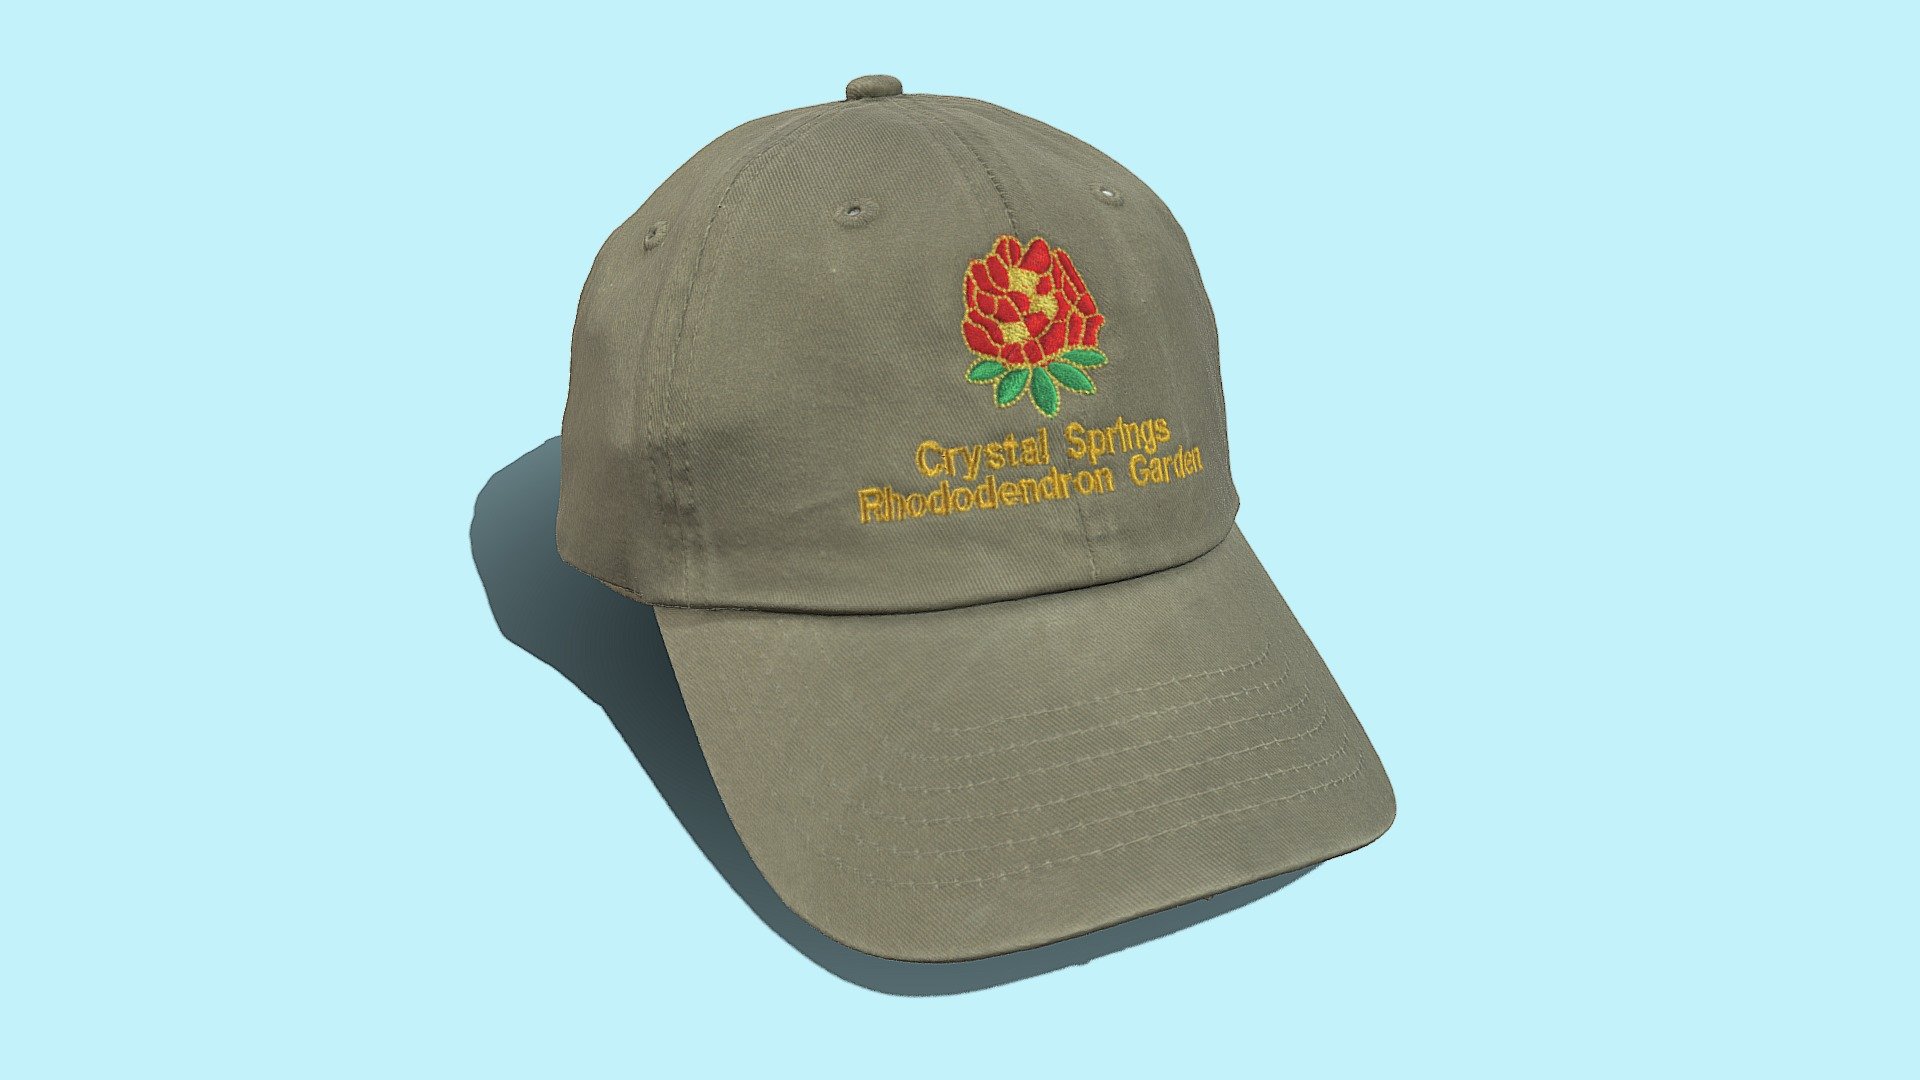 An example of our 3D scanning capabilities for apparel items.

This unisex baseball cap was scanned with the Artec Space Spider and cleaned up in Artec Studio 15. The cap is from the Crystal Springs Rhododendron Garden in Portland, OR 3d model